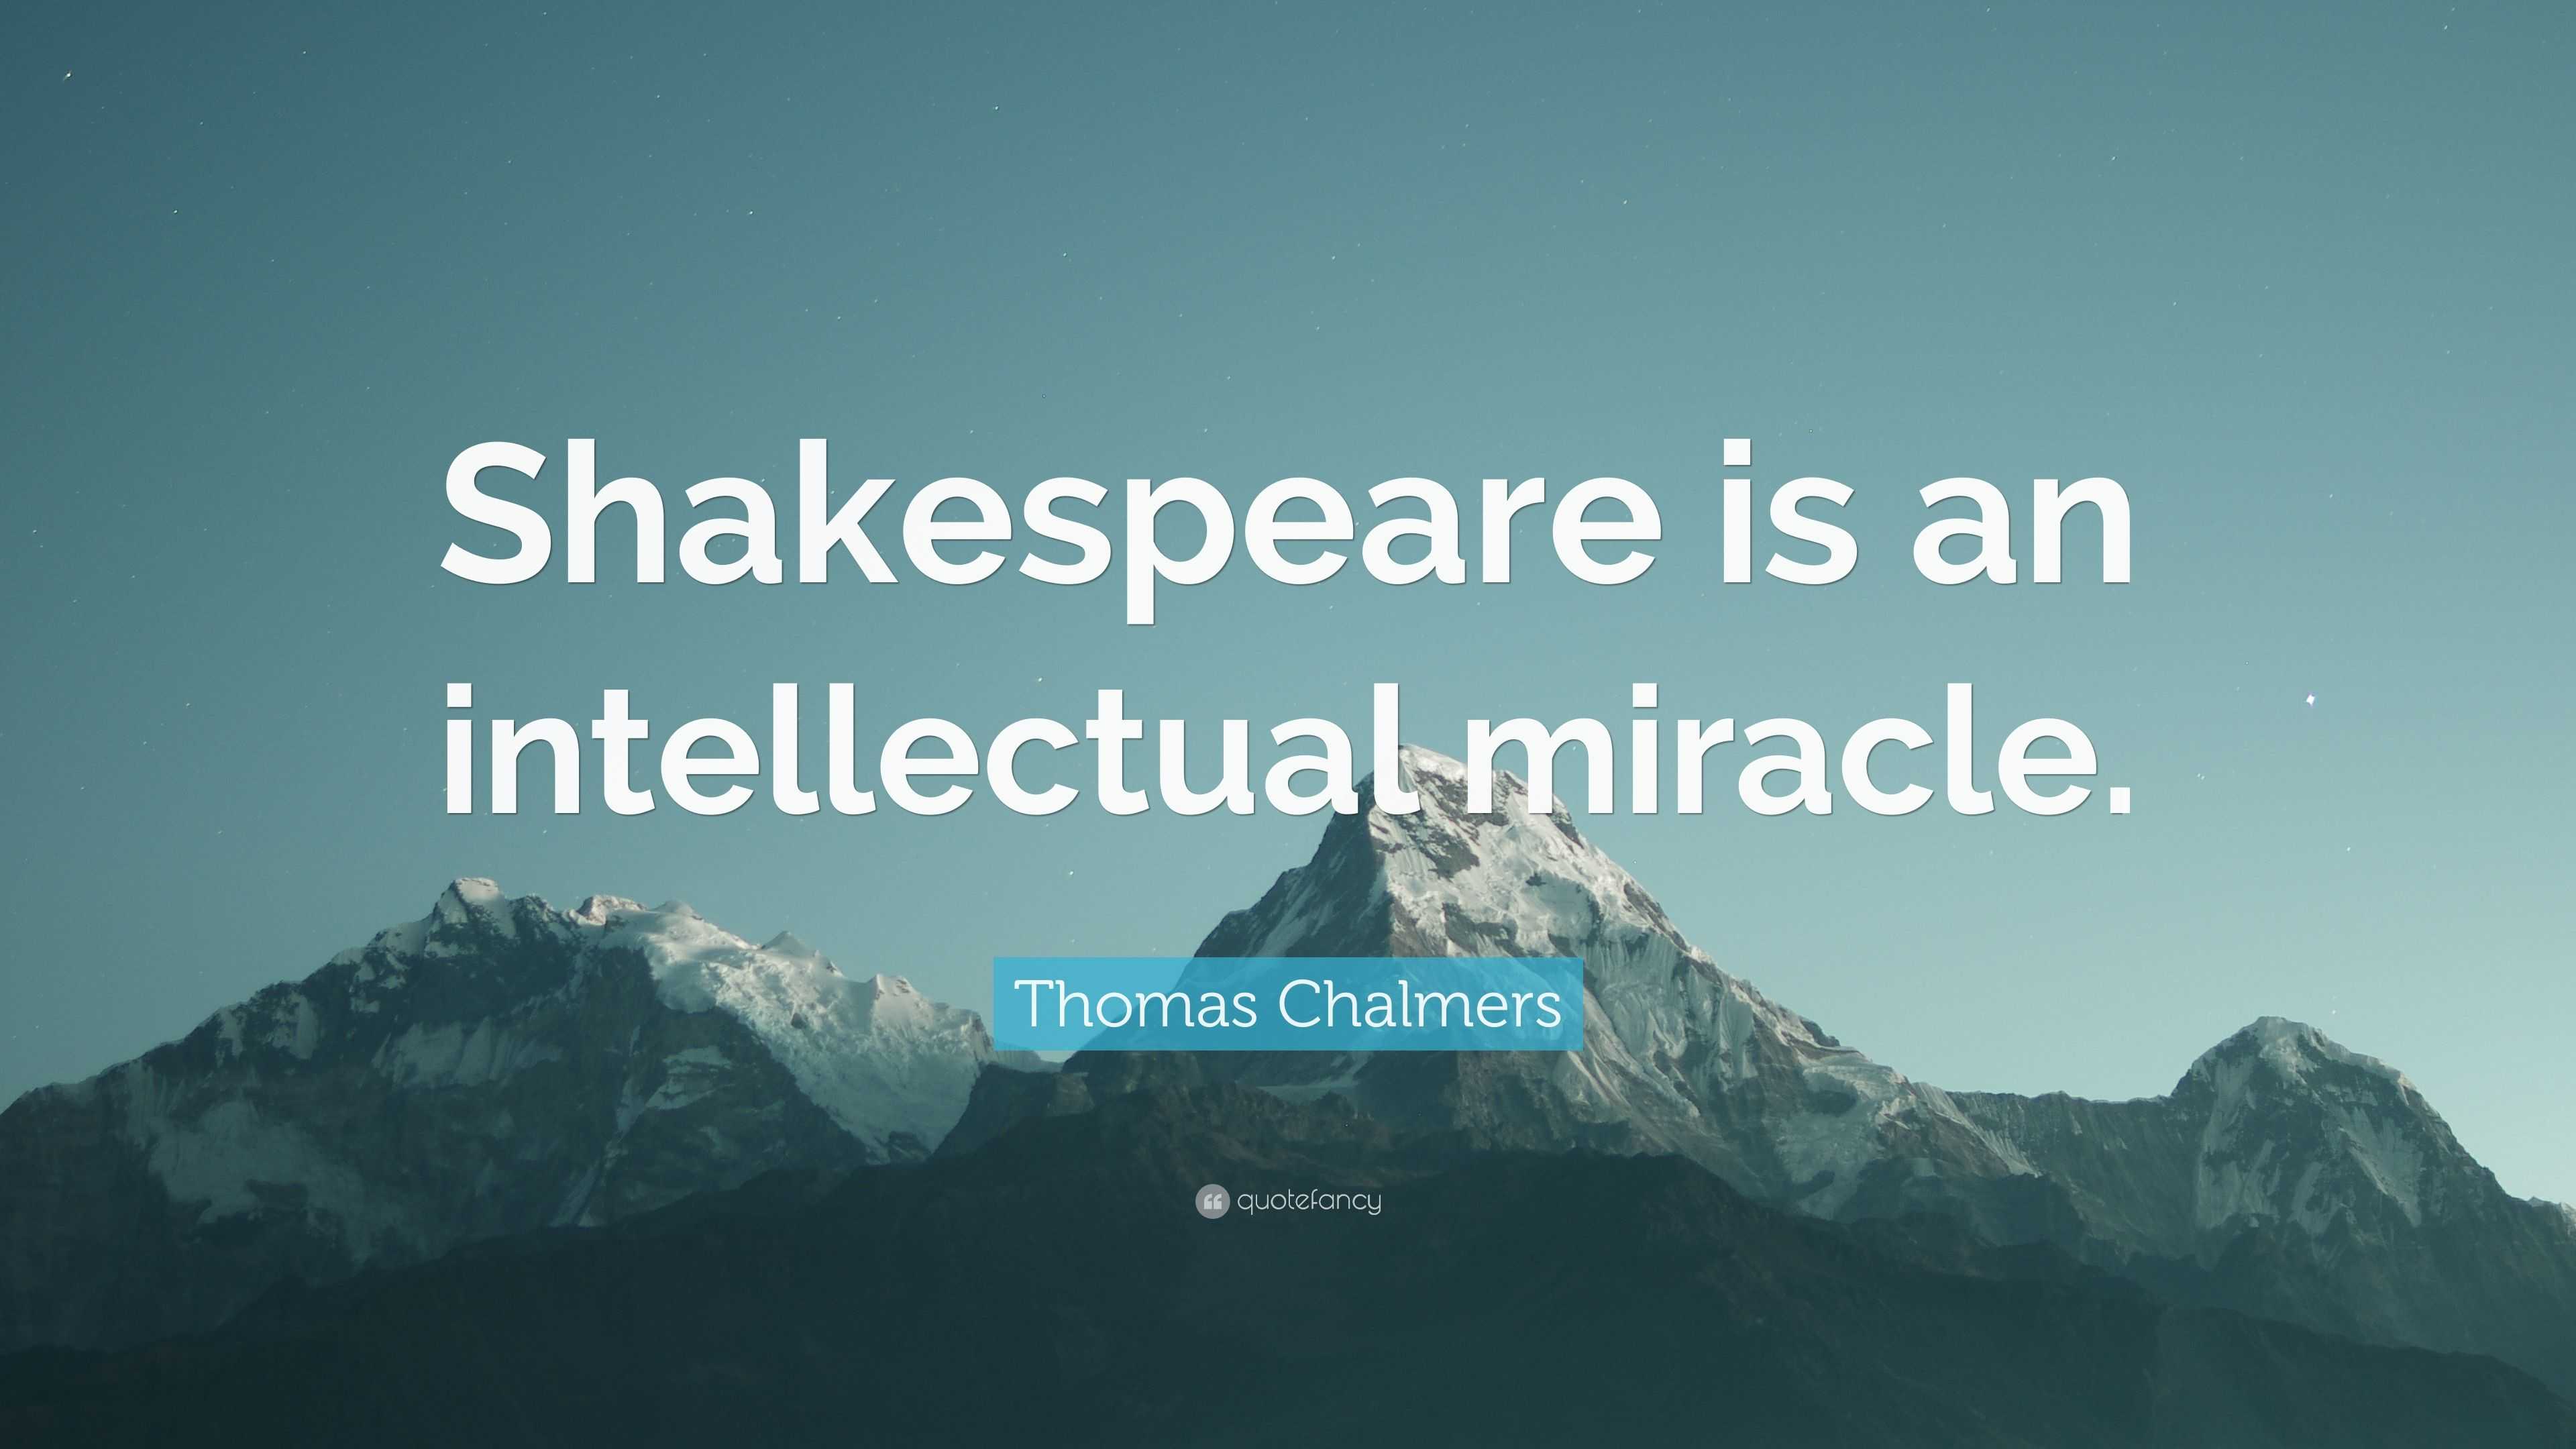 Thomas Chalmers Quote: “Shakespeare is an intellectual miracle.”